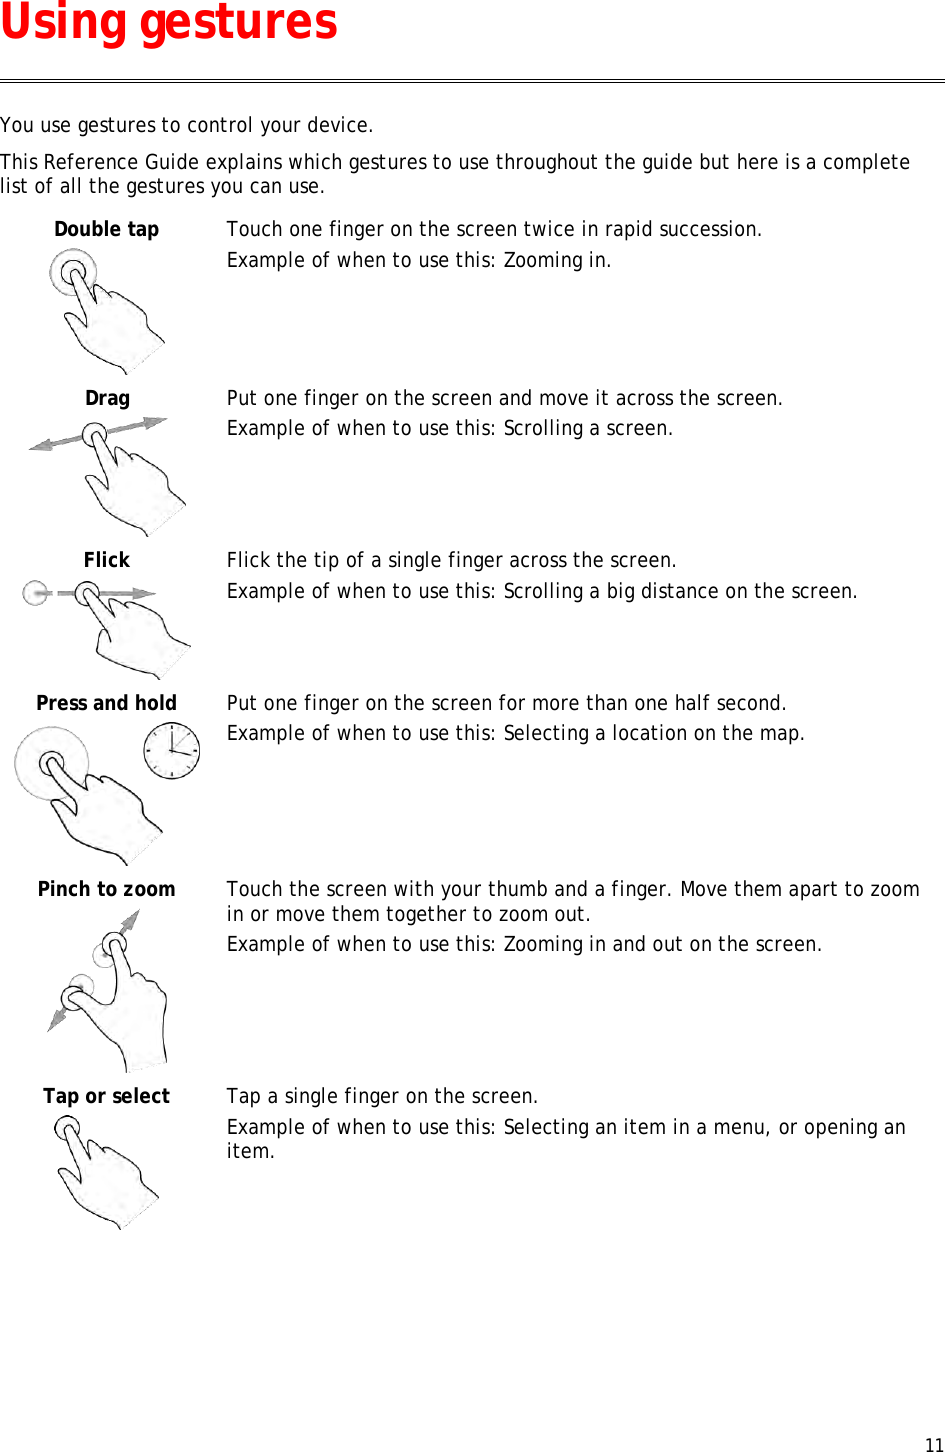  11  You use gestures to control your device.  This Reference Guide explains which gestures to use throughout the guide but here is a complete list of all the gestures you can use. Double tap   Touch one finger on the screen twice in rapid succession. Example of when to use this: Zooming in.  Drag   Put one finger on the screen and move it across the screen. Example of when to use this: Scrolling a screen. Flick   Flick the tip of a single finger across the screen. Example of when to use this: Scrolling a big distance on the screen. Press and hold   Put one finger on the screen for more than one half second. Example of when to use this: Selecting a location on the map.  Pinch to zoom   Touch the screen with your thumb and a finger. Move them apart to zoom in or move them together to zoom out. Example of when to use this: Zooming in and out on the screen. Tap or select   Tap a single finger on the screen. Example of when to use this: Selecting an item in a menu, or opening an item.  Using gestures 